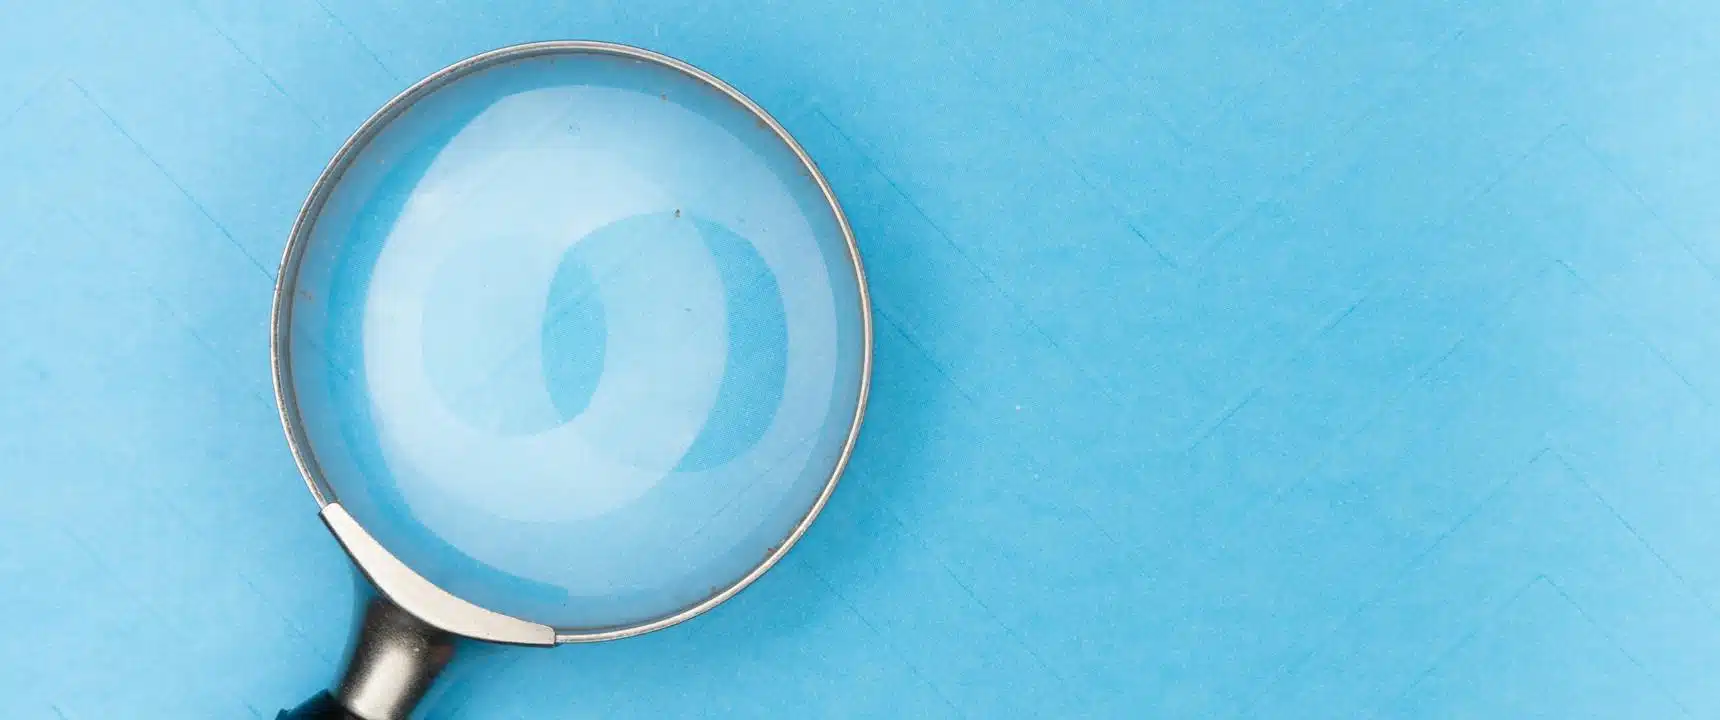 magnifying glass: 3 Clues Your Roof Needs Attention